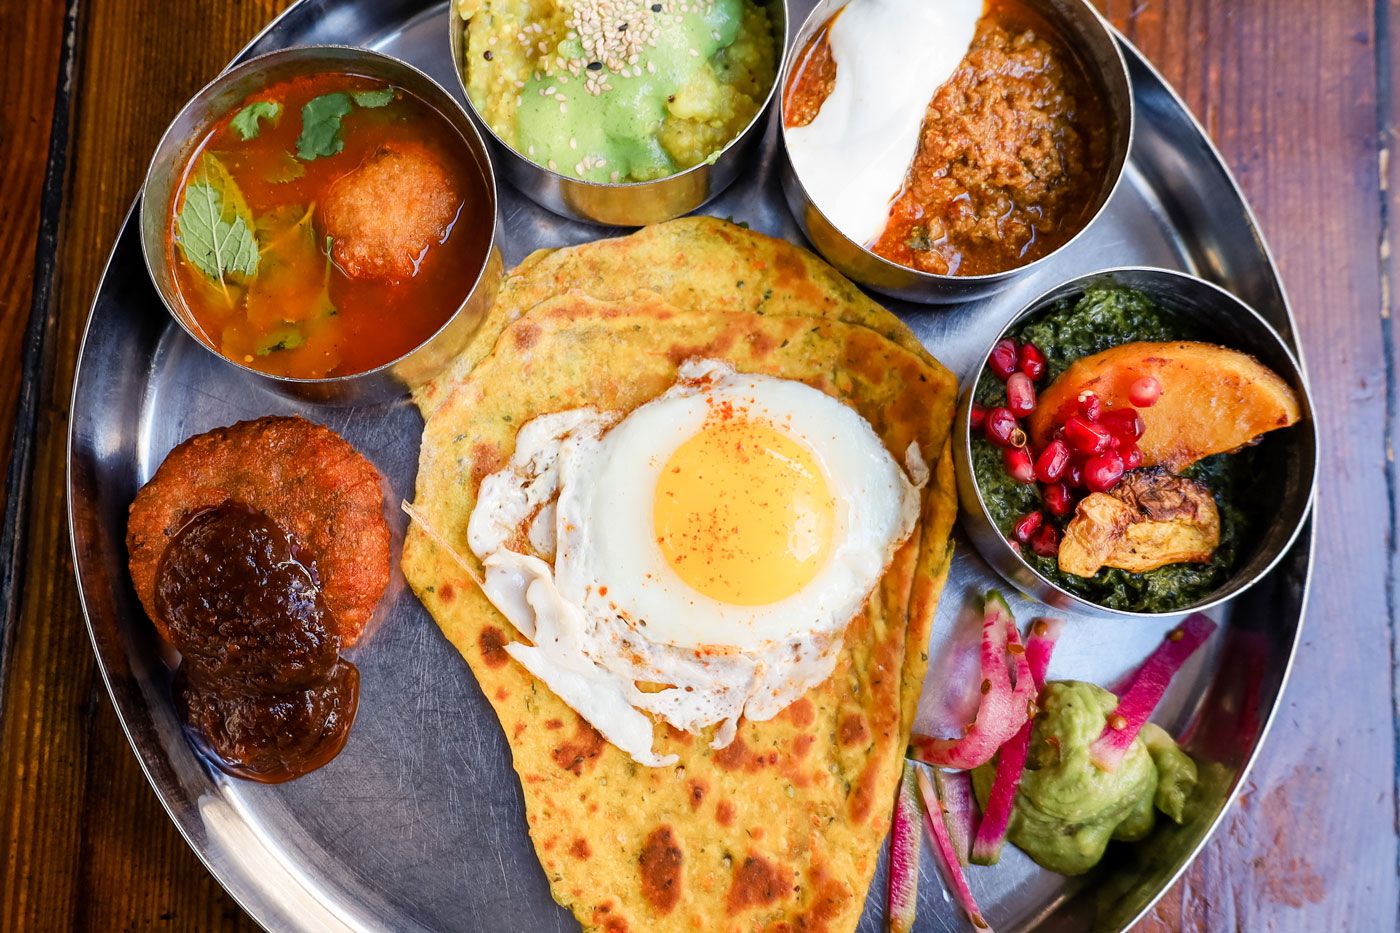 A large tray of morning thali.